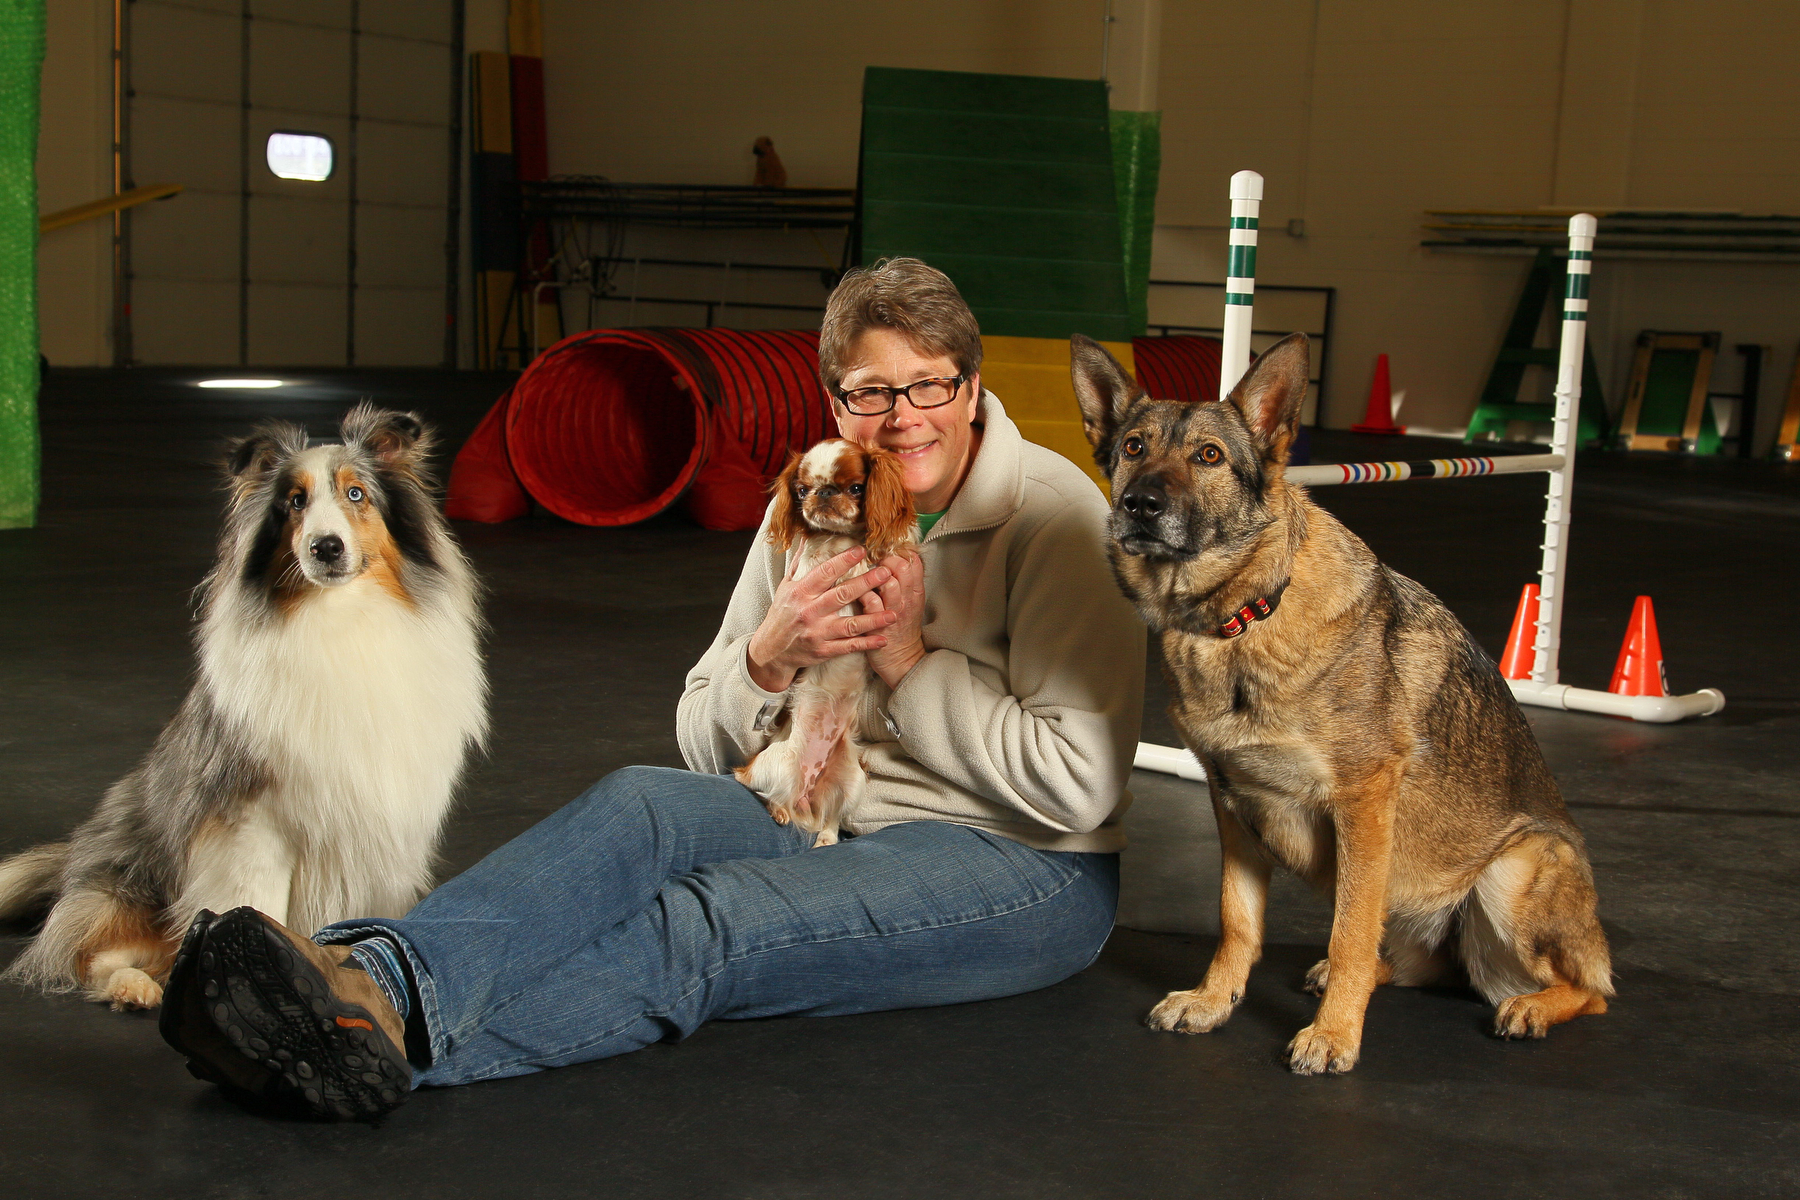 About The Cloud Nine Dog Training Team